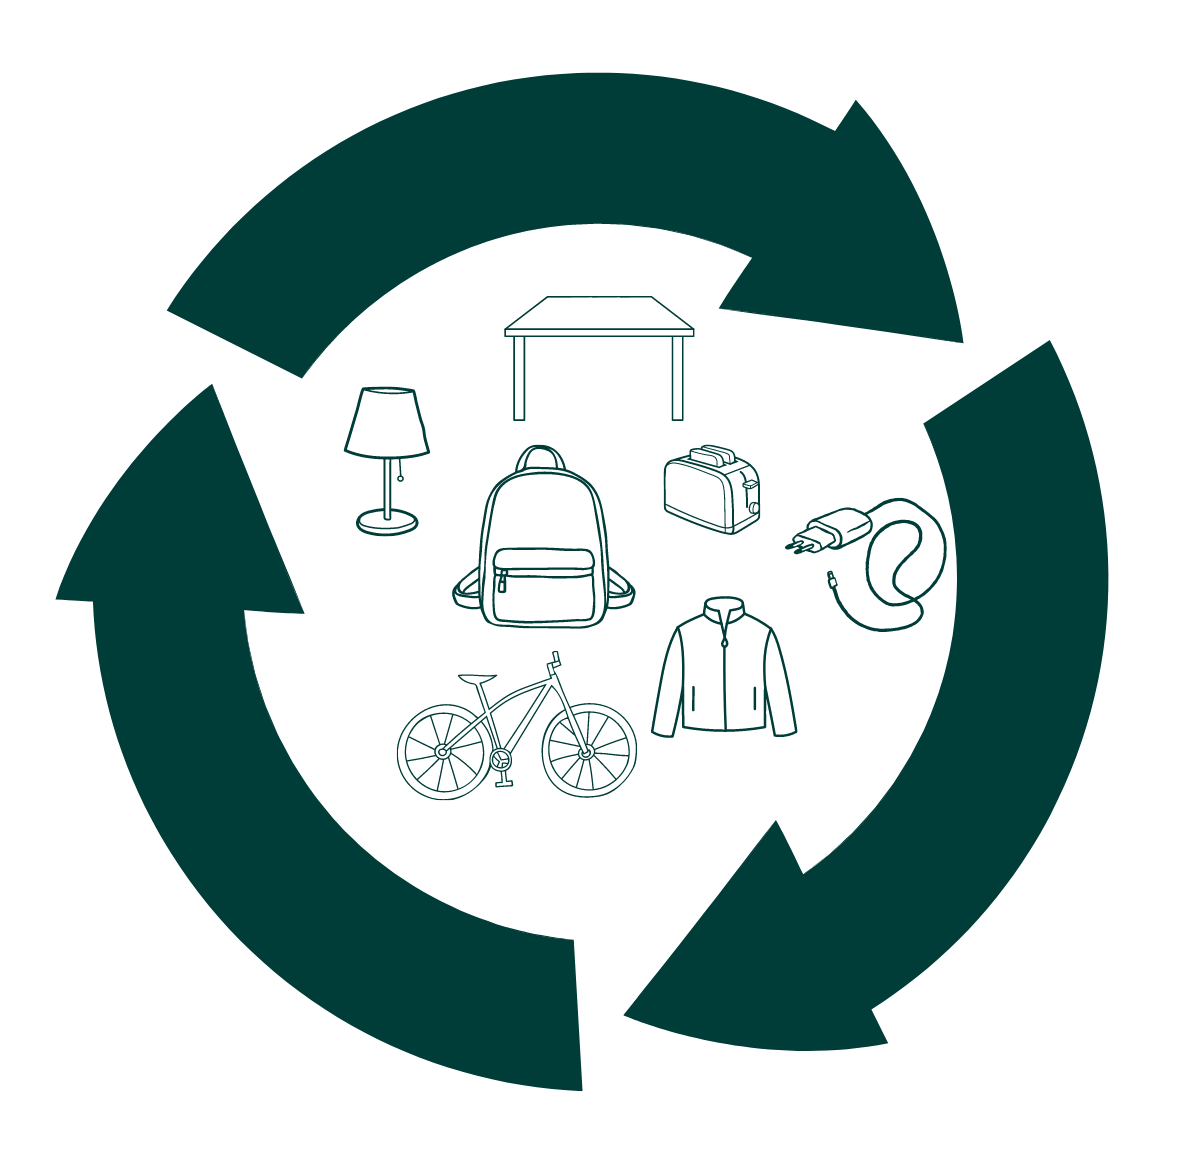 Green recycling arrows with items in the middle such as a lamp, table, backpack, jacket, bike, toaster, charging plug - all to demonstrate "freecycling".